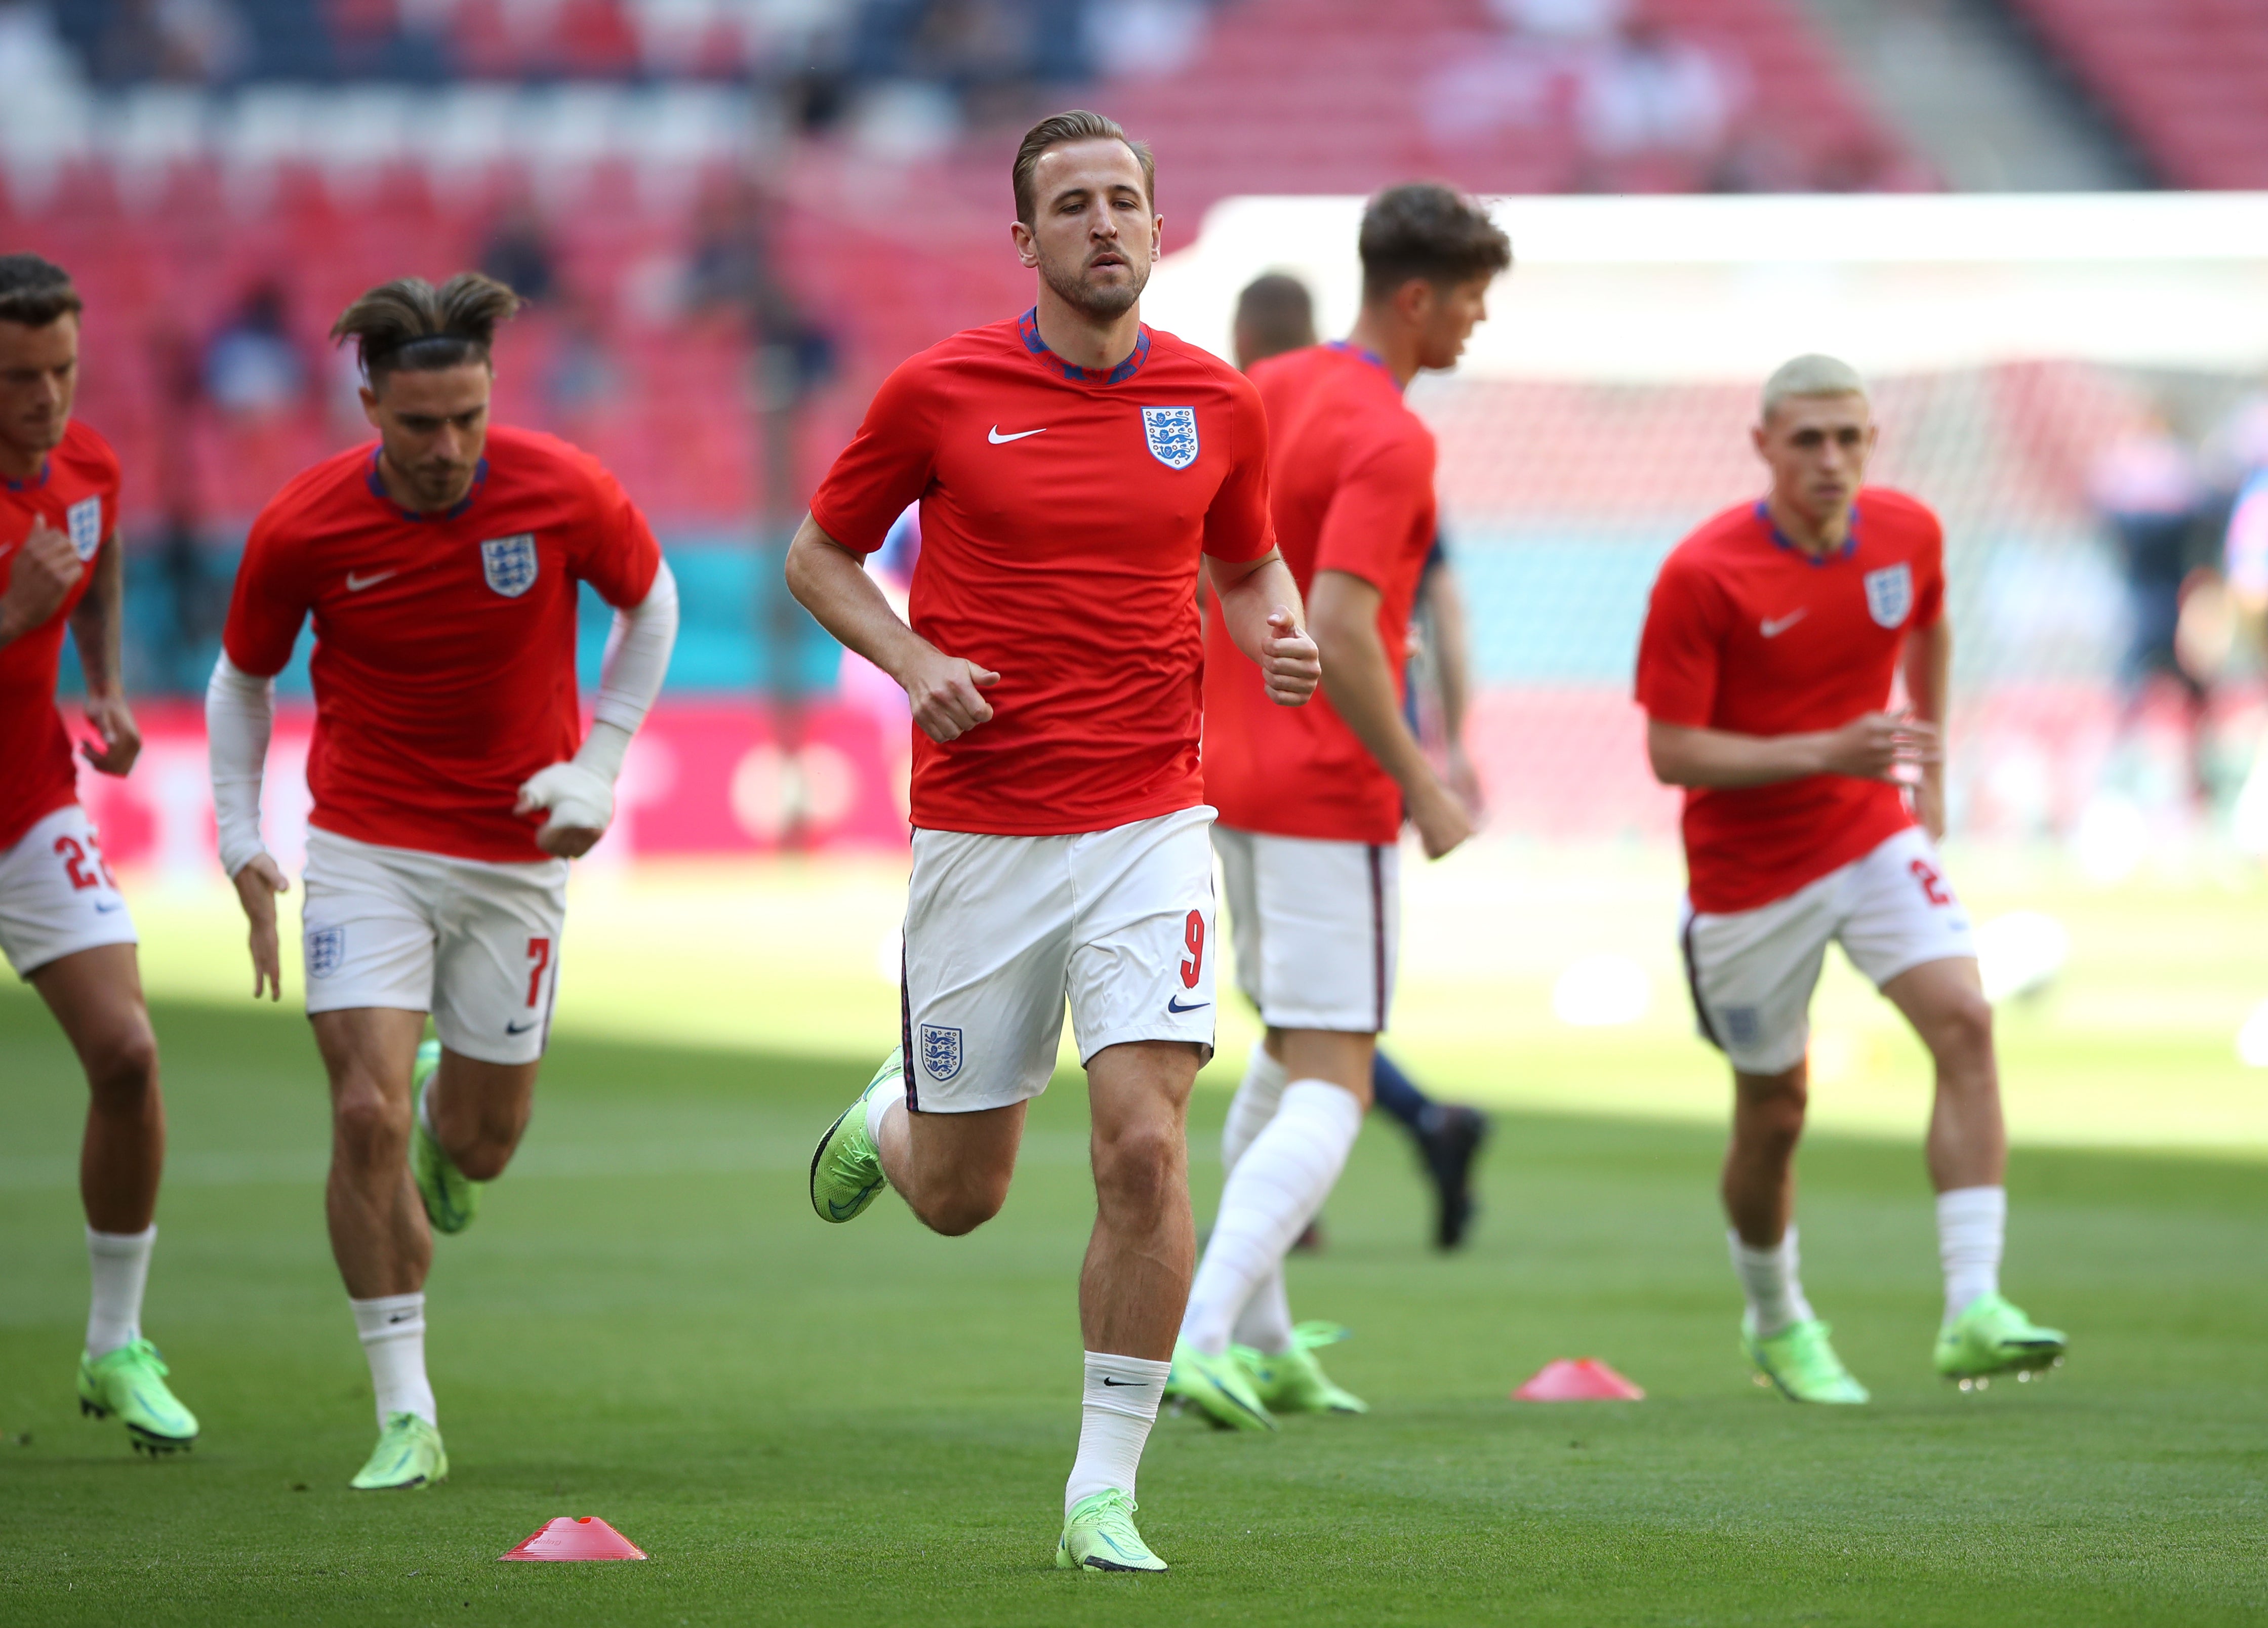 Harry Kane is focused firmly on leading England to Euro 2020 glory